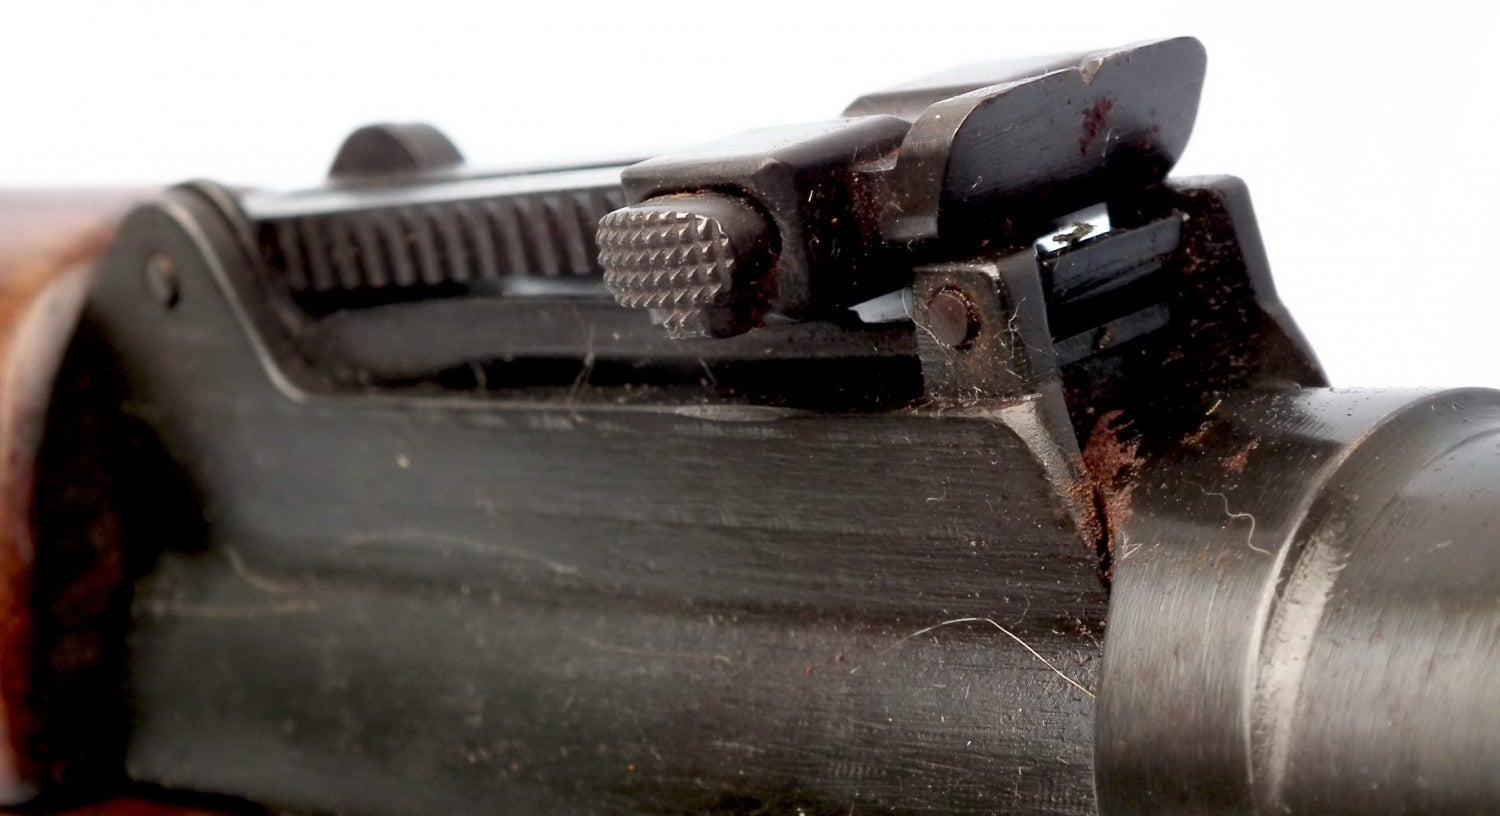 The same gun’s adjustable ramp notch rear sight. It can be noticed that no range adjustment markings are present.